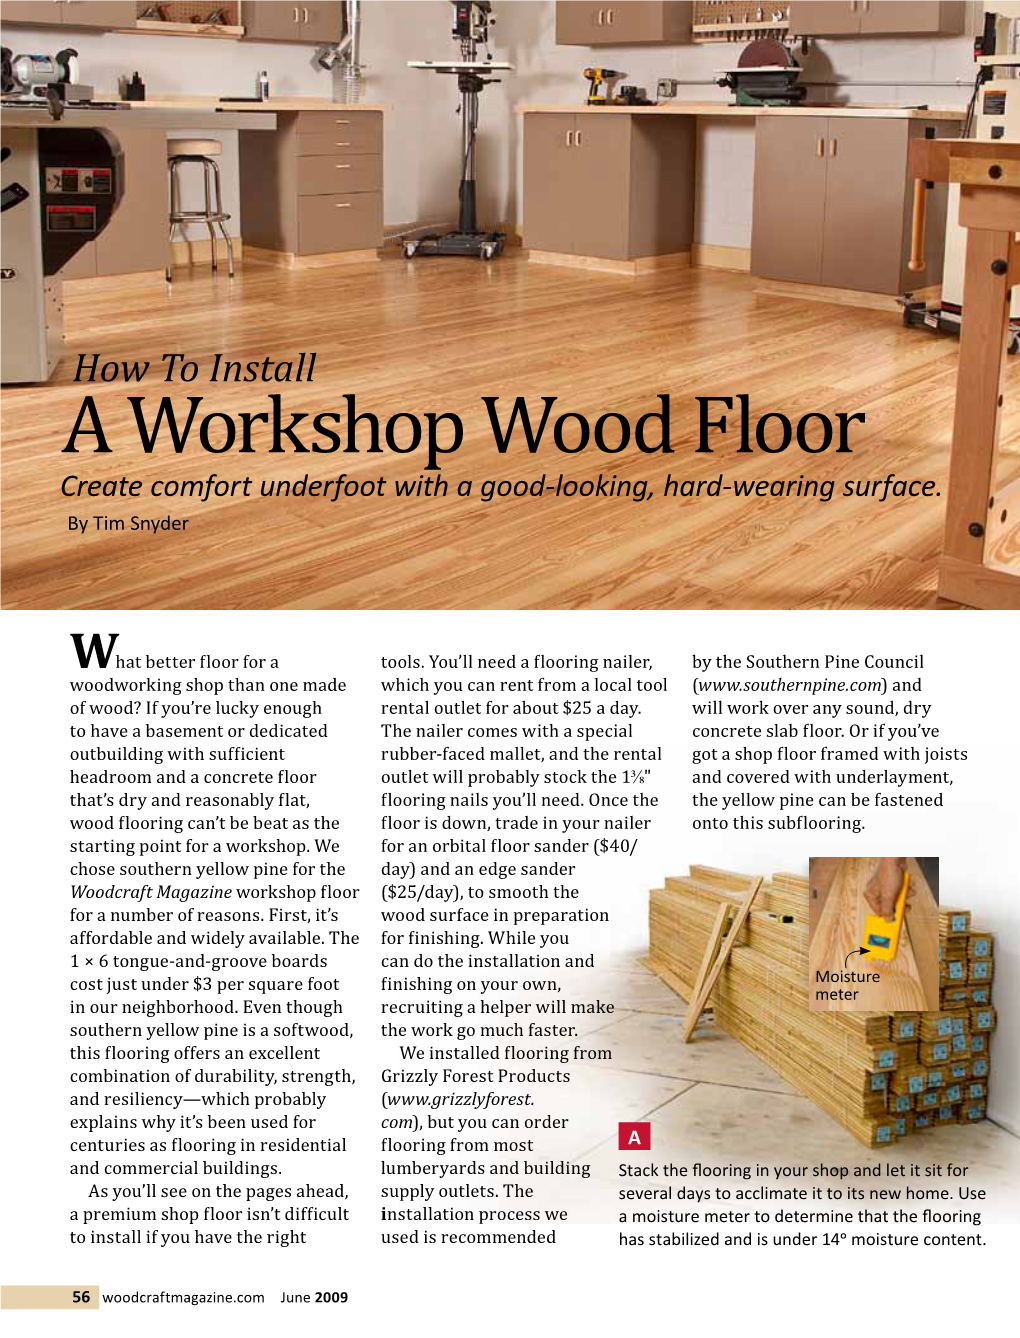 A Workshop Wood Floor Create Comfort Underfoot with a Good-Looking, Hard-Wearing Surface